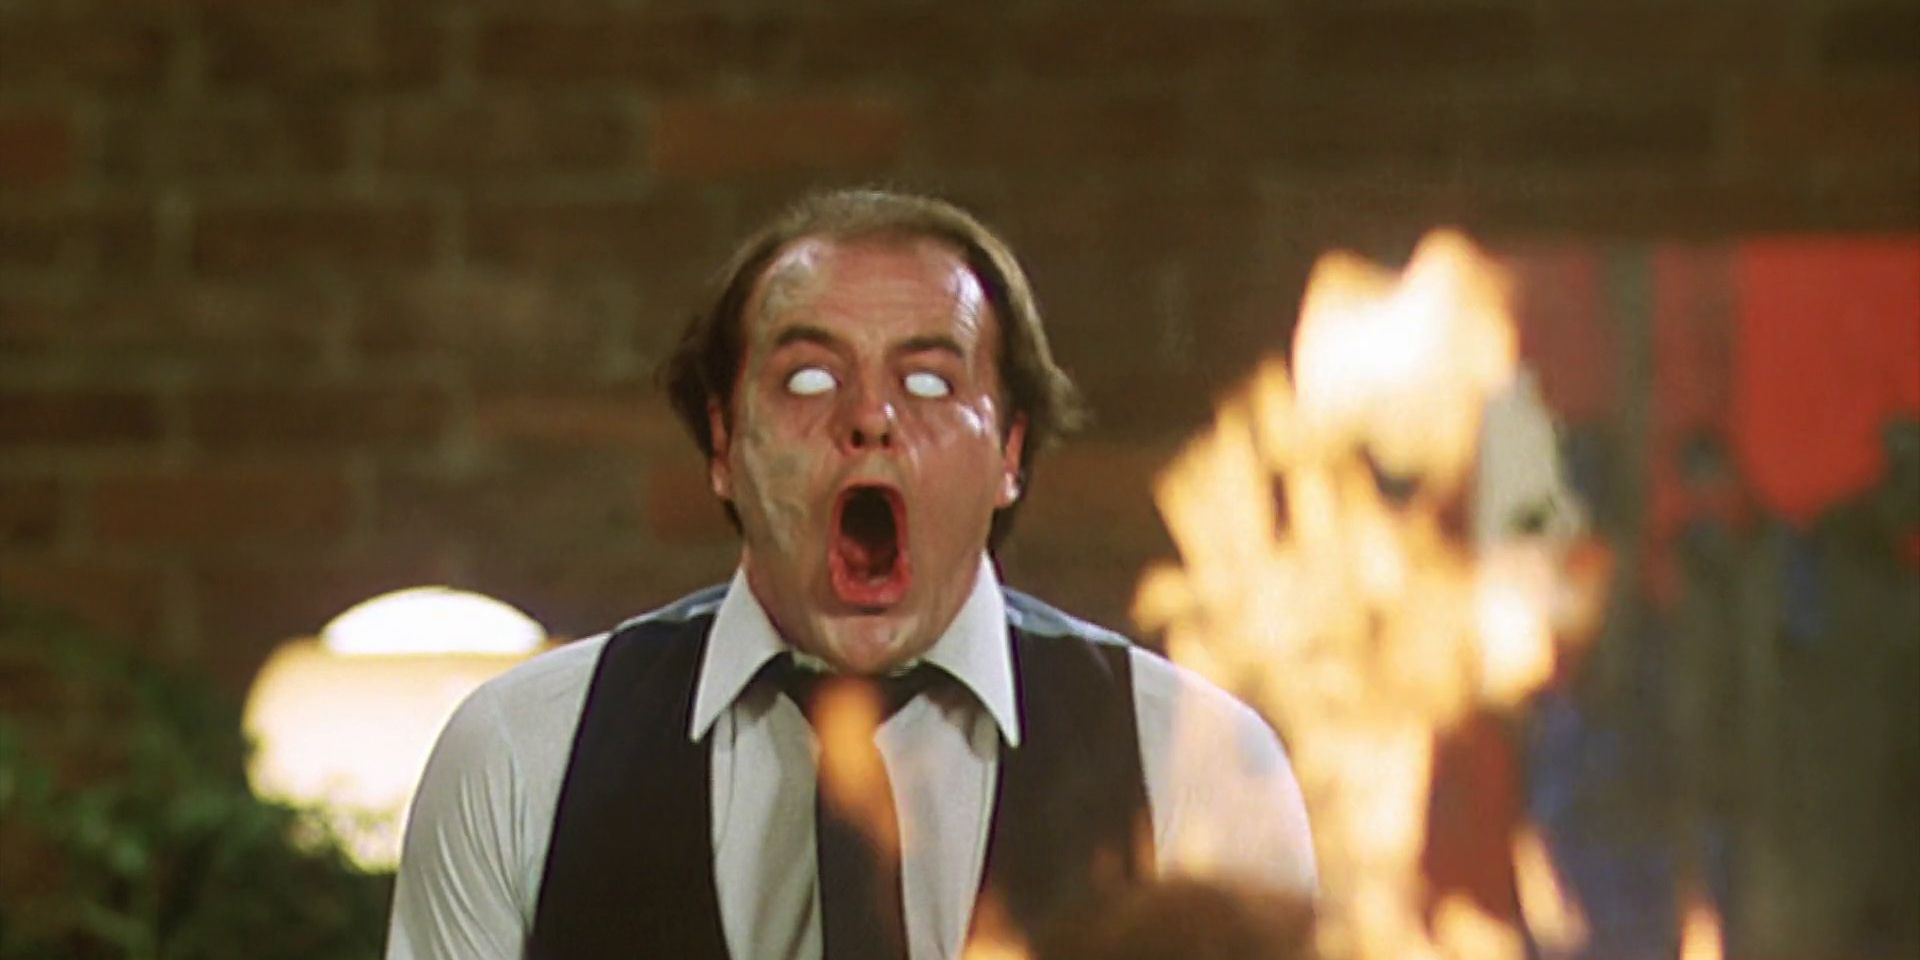 Darryl Revok, as played by Michael Ironside, near the end of Scanners